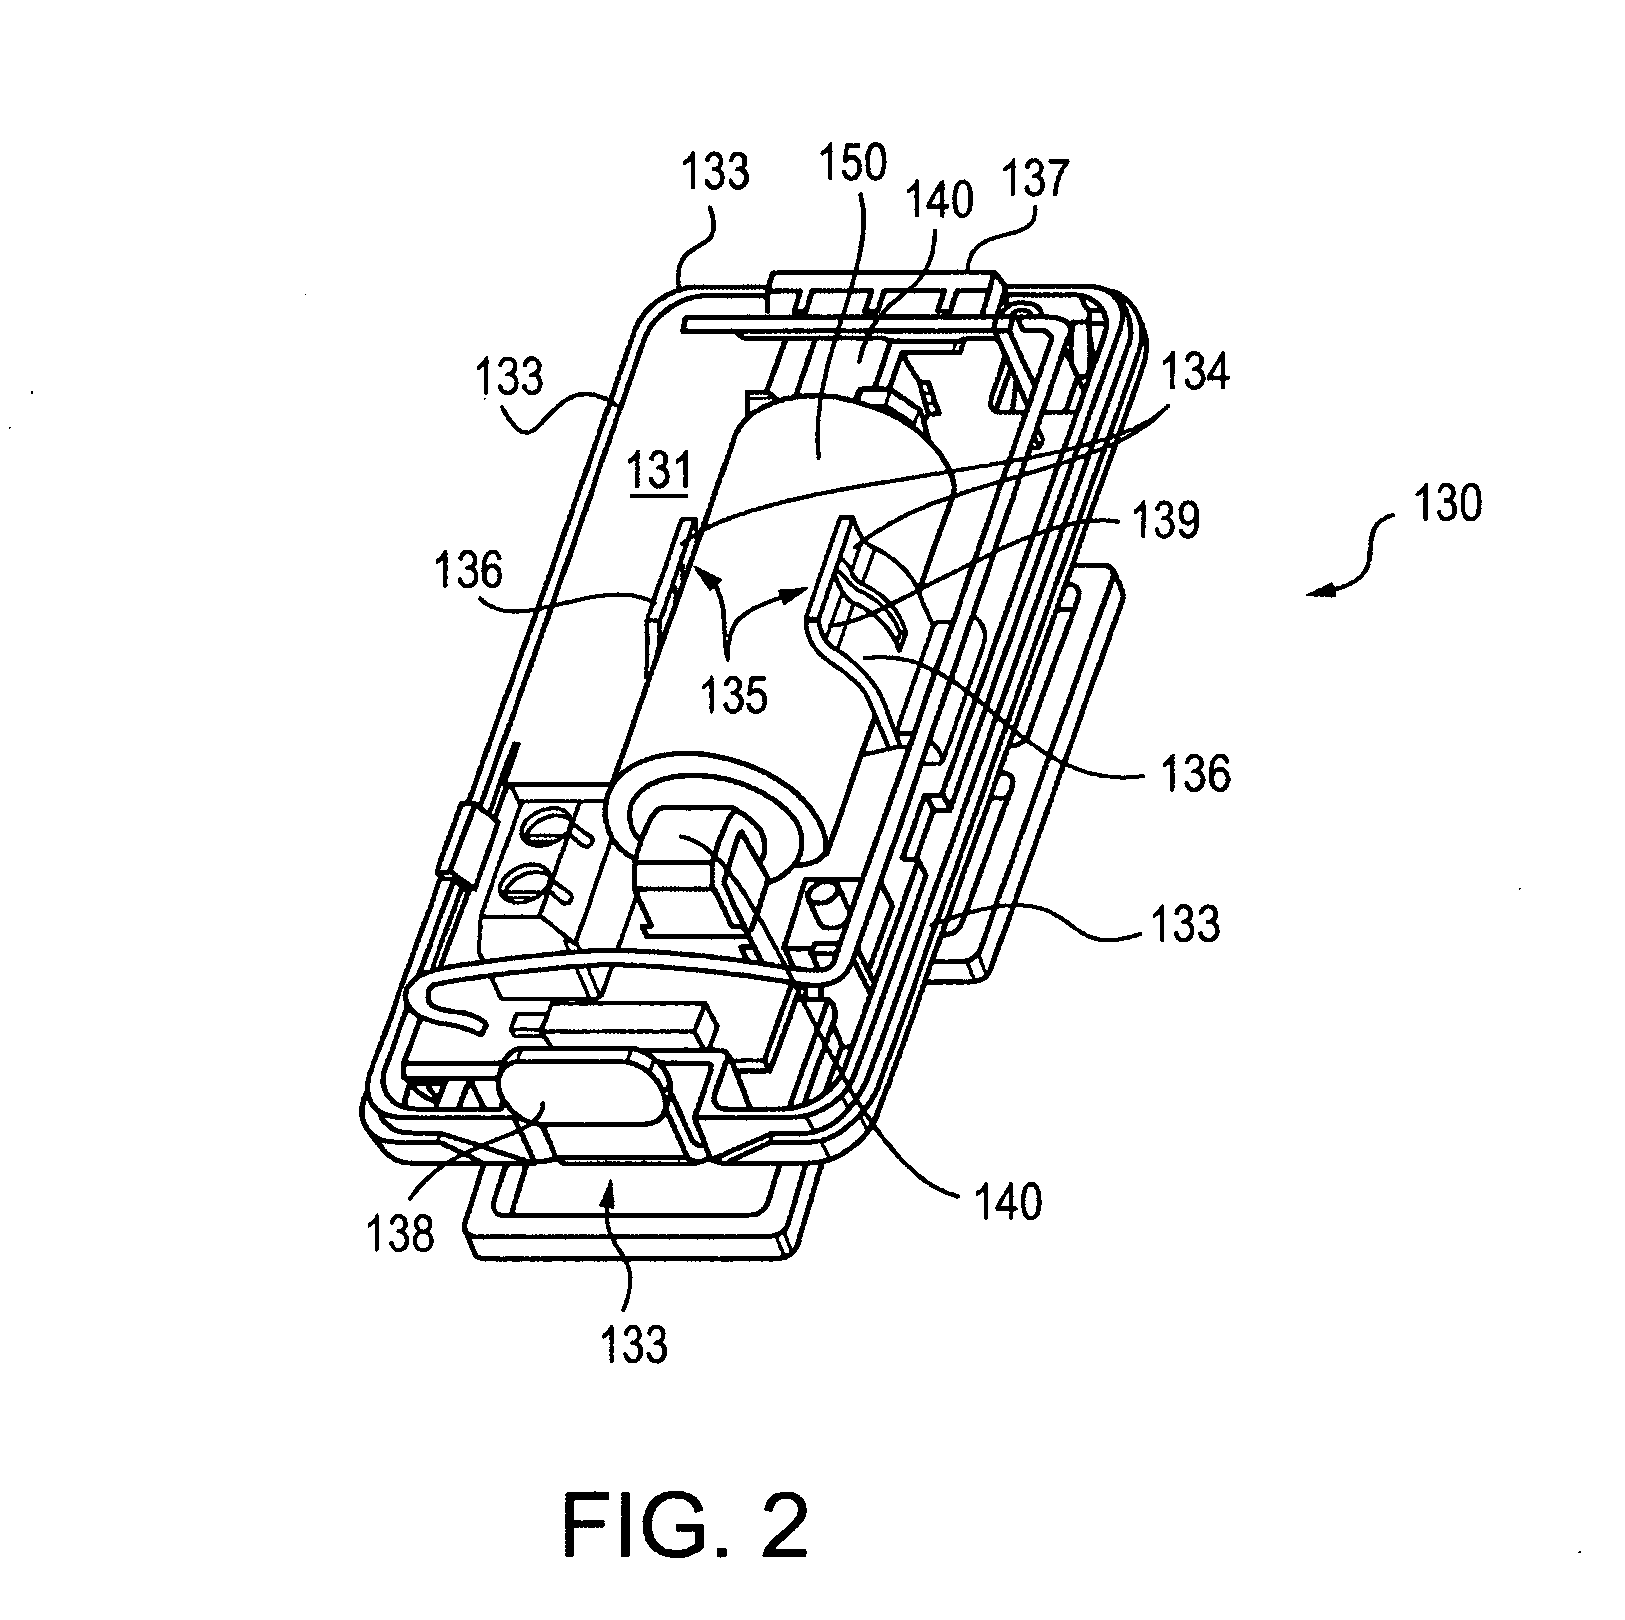 Impact resistant battery housing with cover